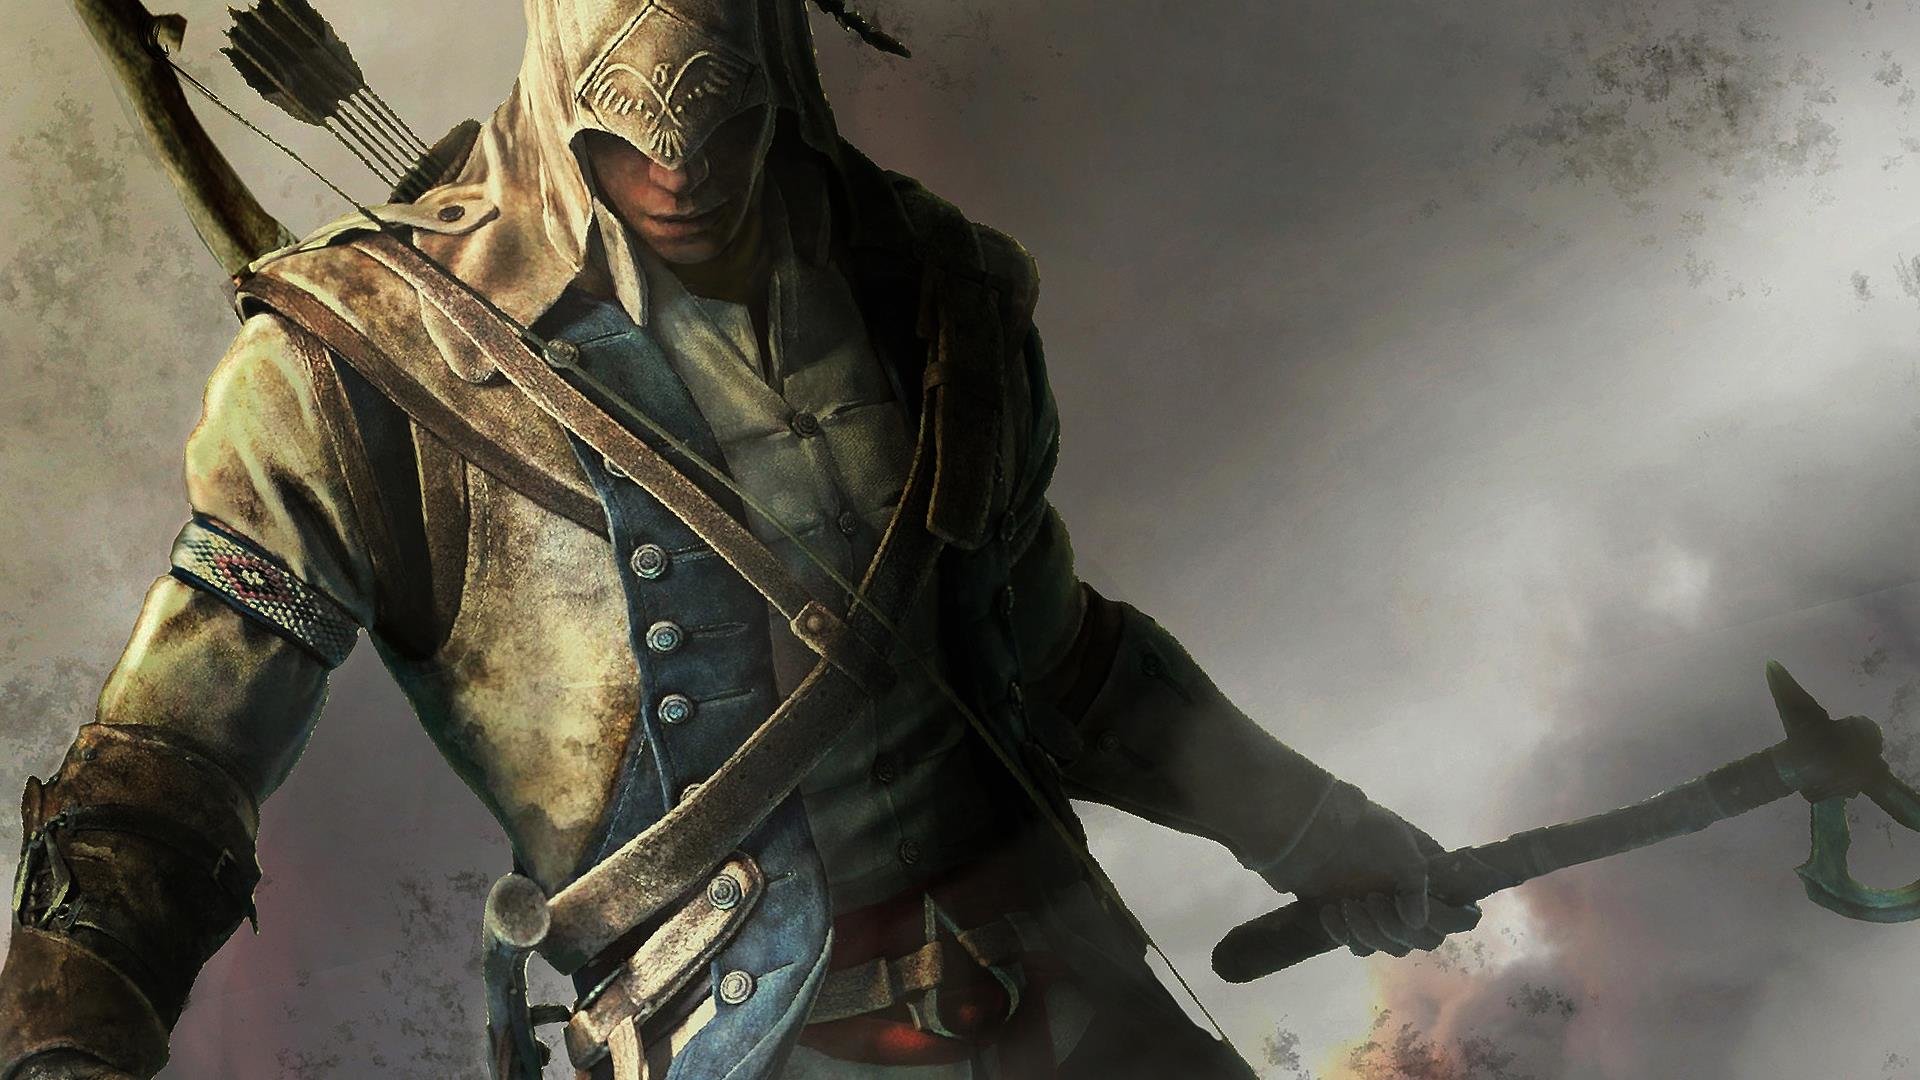 Download hd 1920x1080 Assassin's Creed 3 desktop background ID:447349 for free